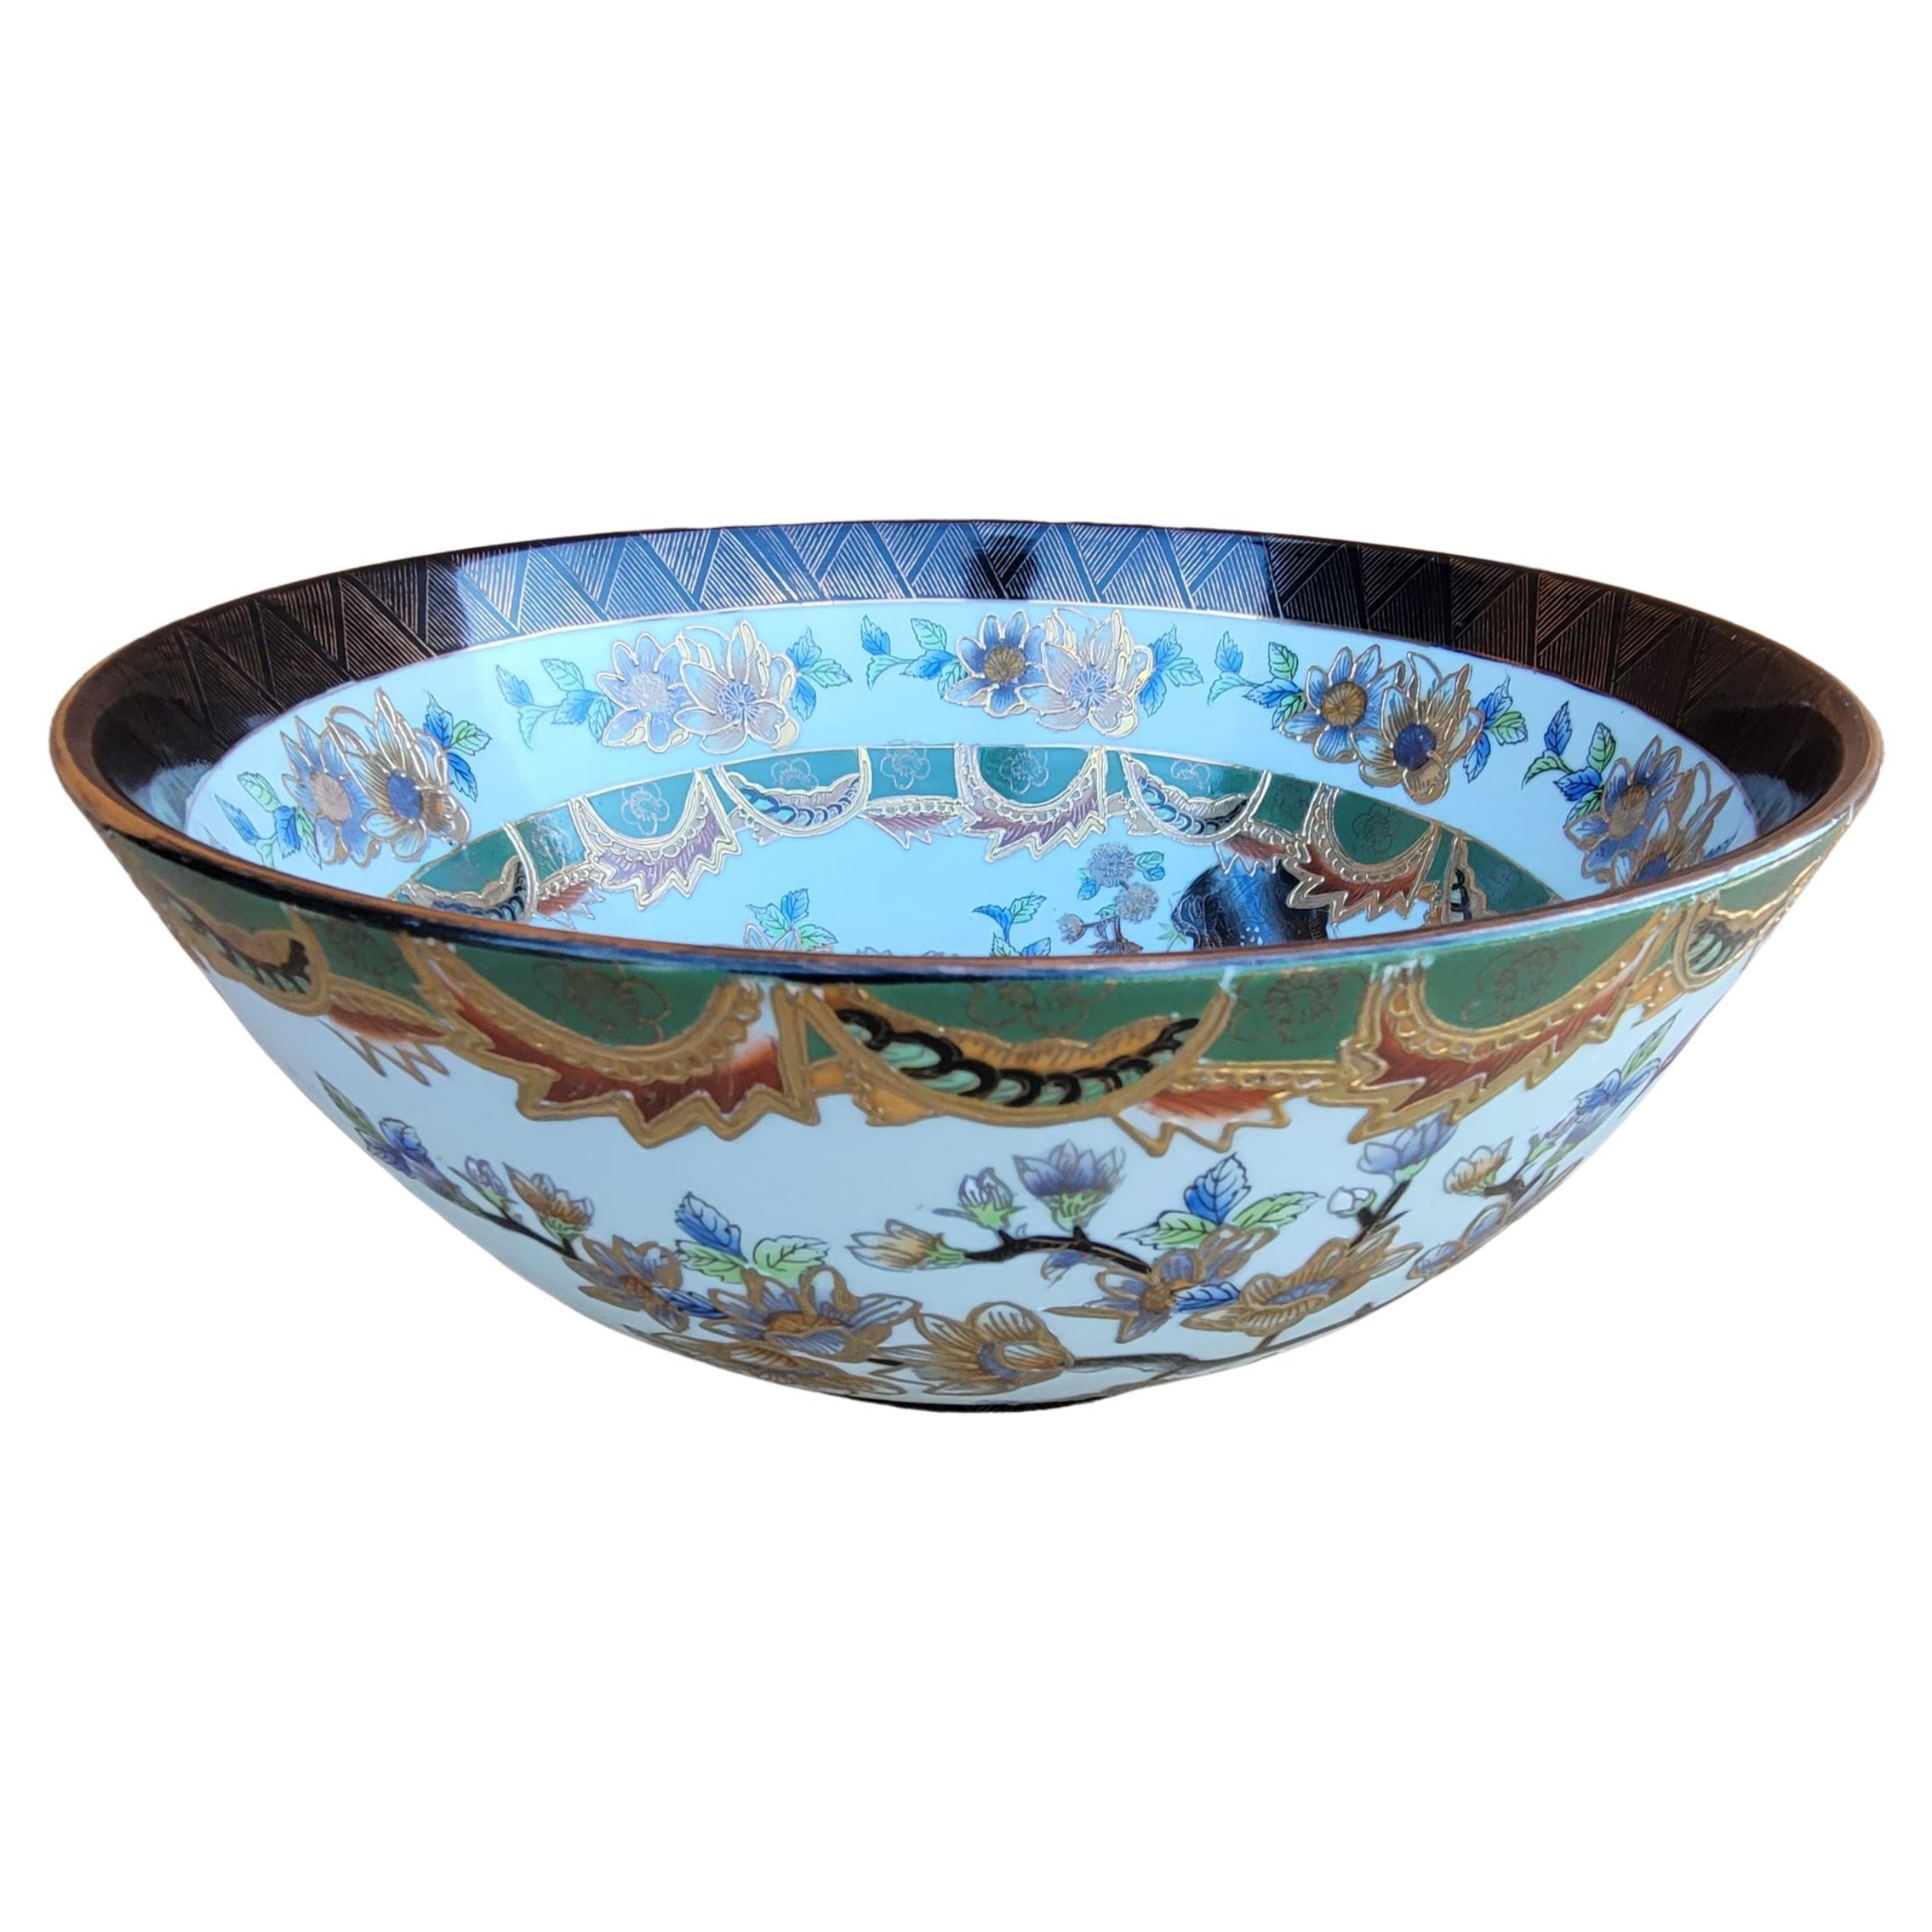 Large Hand-Painted Chinese Enamel And Gilt Decorated Porcelain Bowl For Sale 1